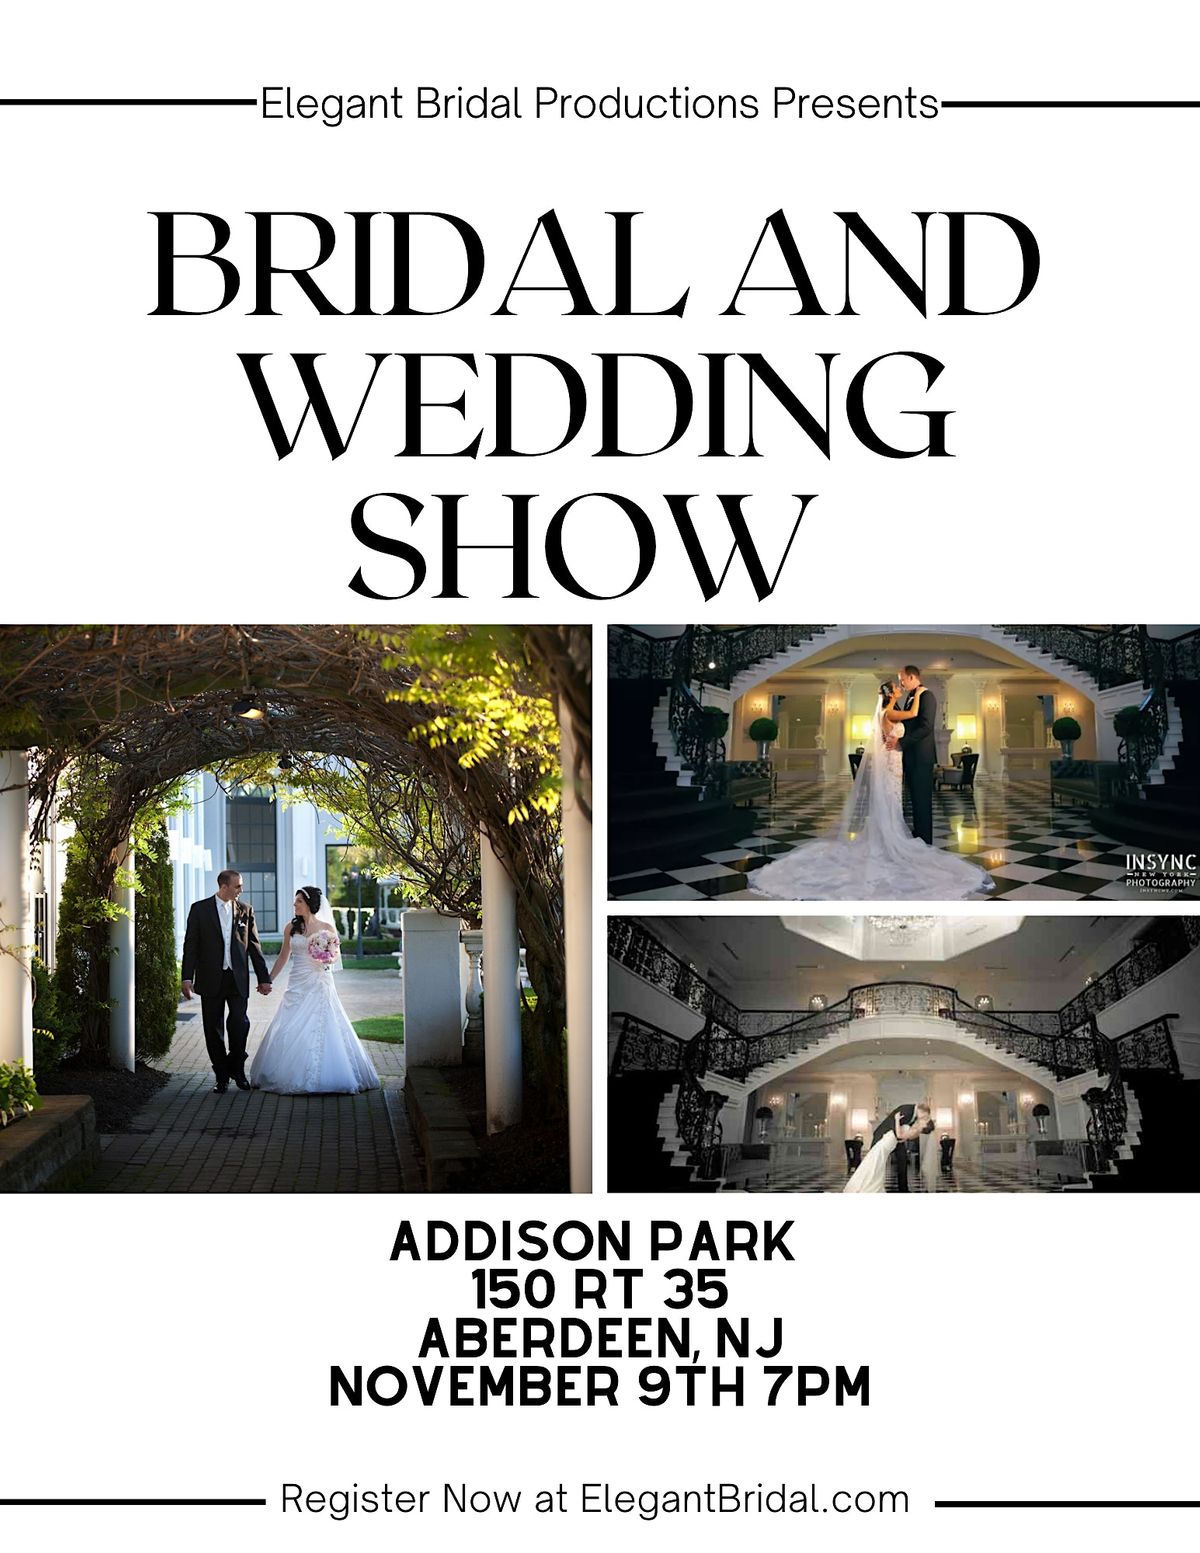 Bridal Show and Wedding Expo at Addison park